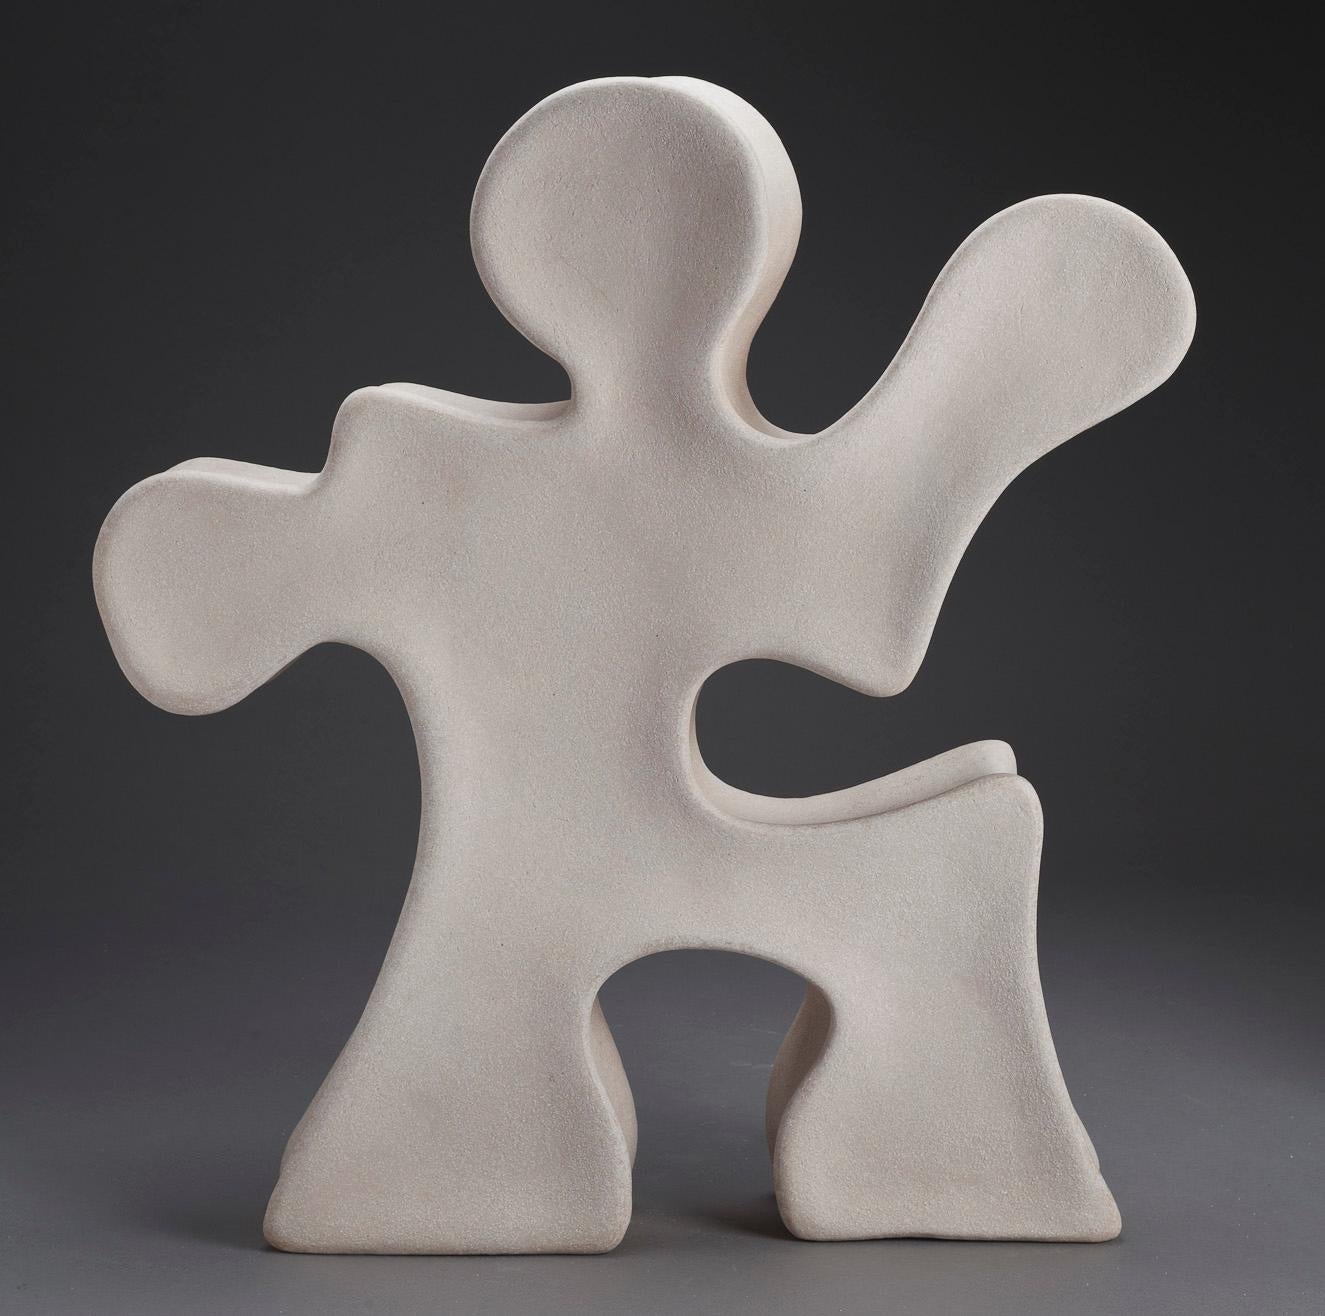 Steve Cartwright, Jigsaw Man

Handmade Sculptural Ceramic, Stoneware Clay, fired to 1250c

Height of 48cm (18.9 in)

Edition of 5 per year